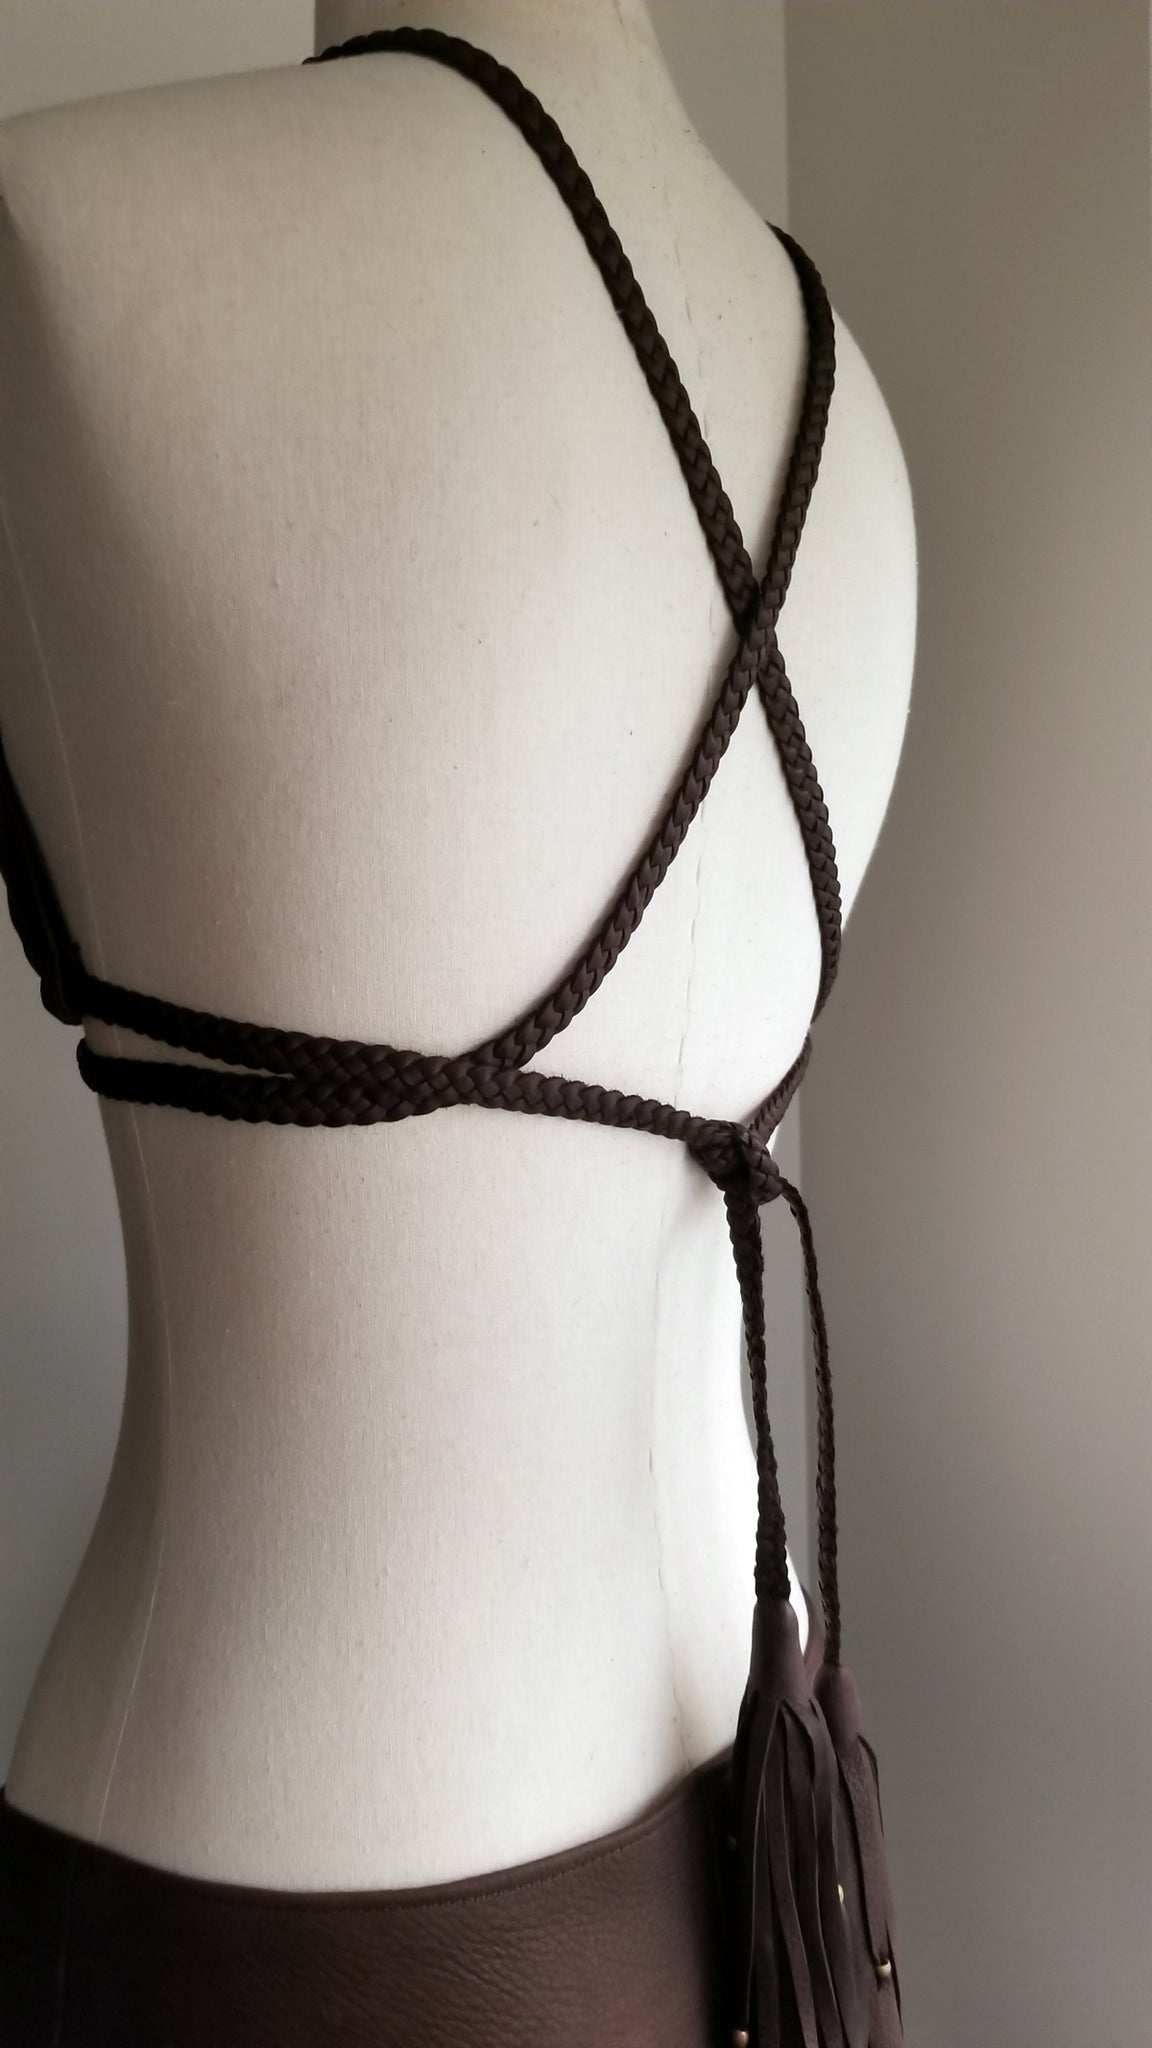 leather bikini set, deerskin leather boy booty shorts bottoms, triangle leather top with braided leather ties and straps, tassels and african beads, chocolate brown on mannequin